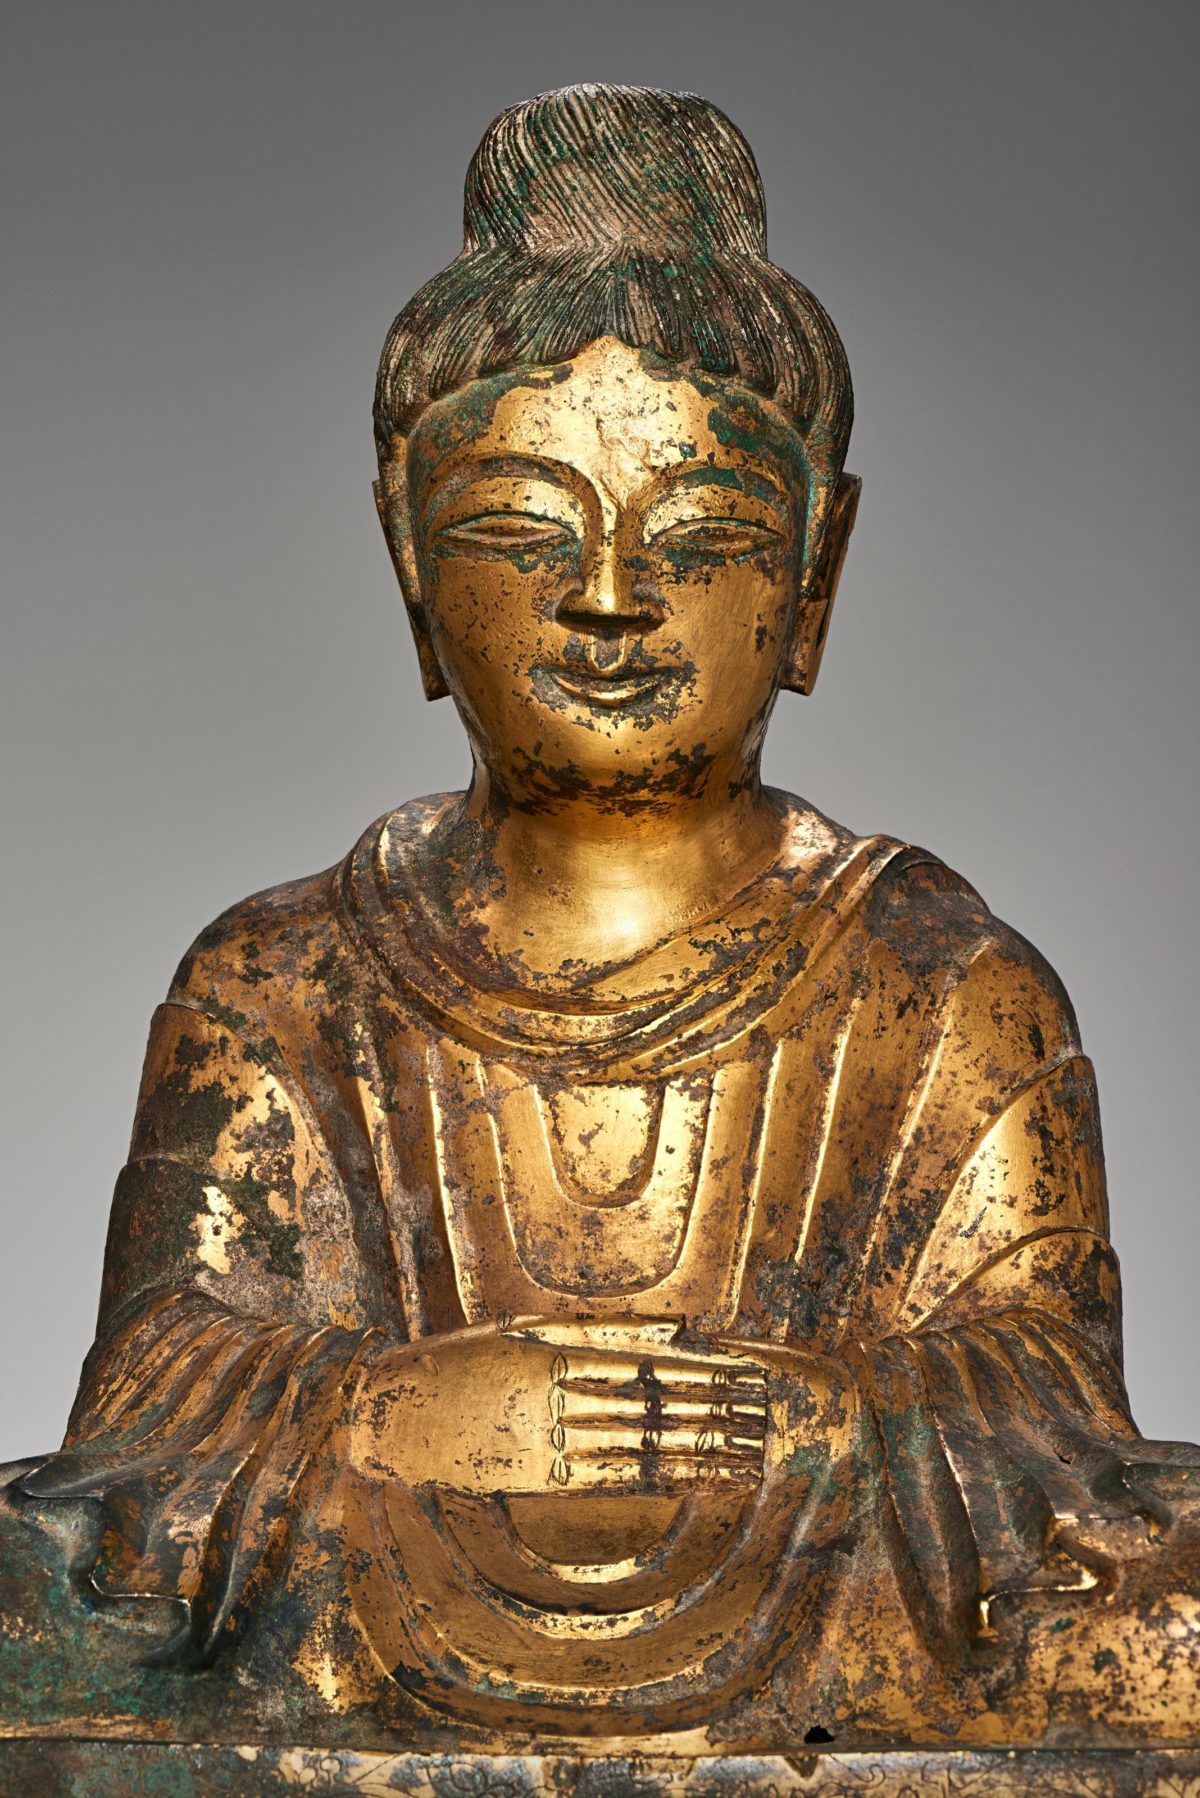 Face and shoulders, and body of a golden Buddha statue.